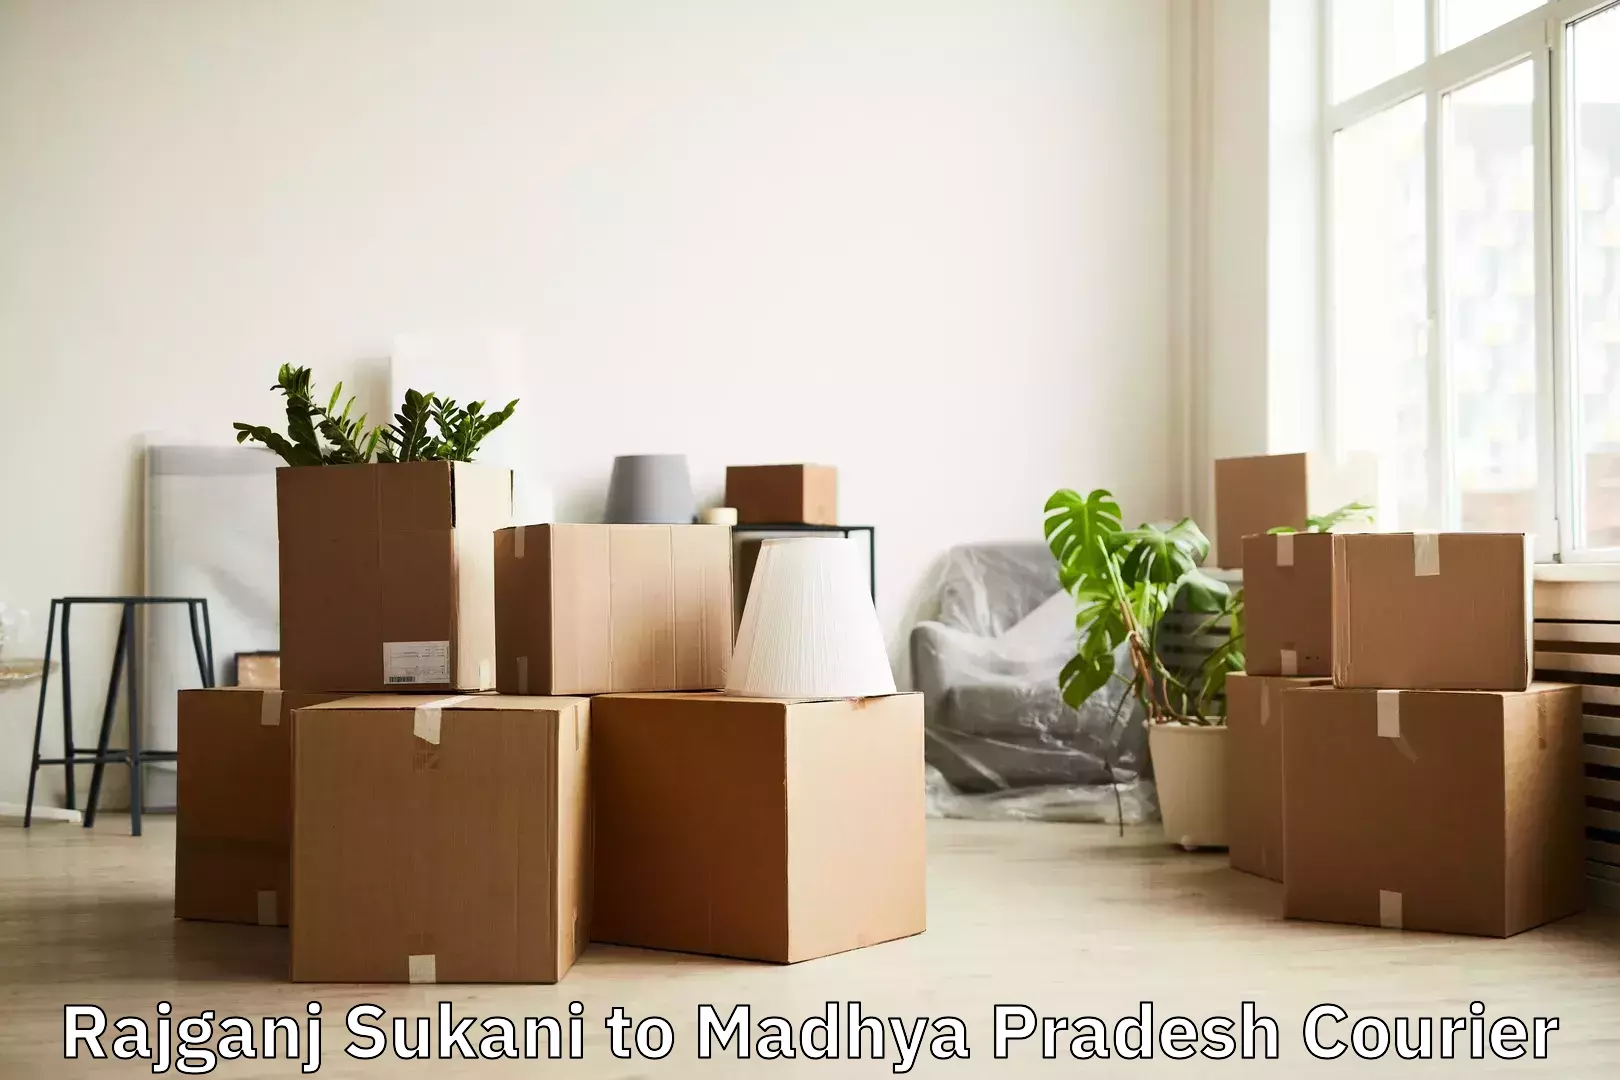 Instant baggage transport quote Rajganj Sukani to Bhopal